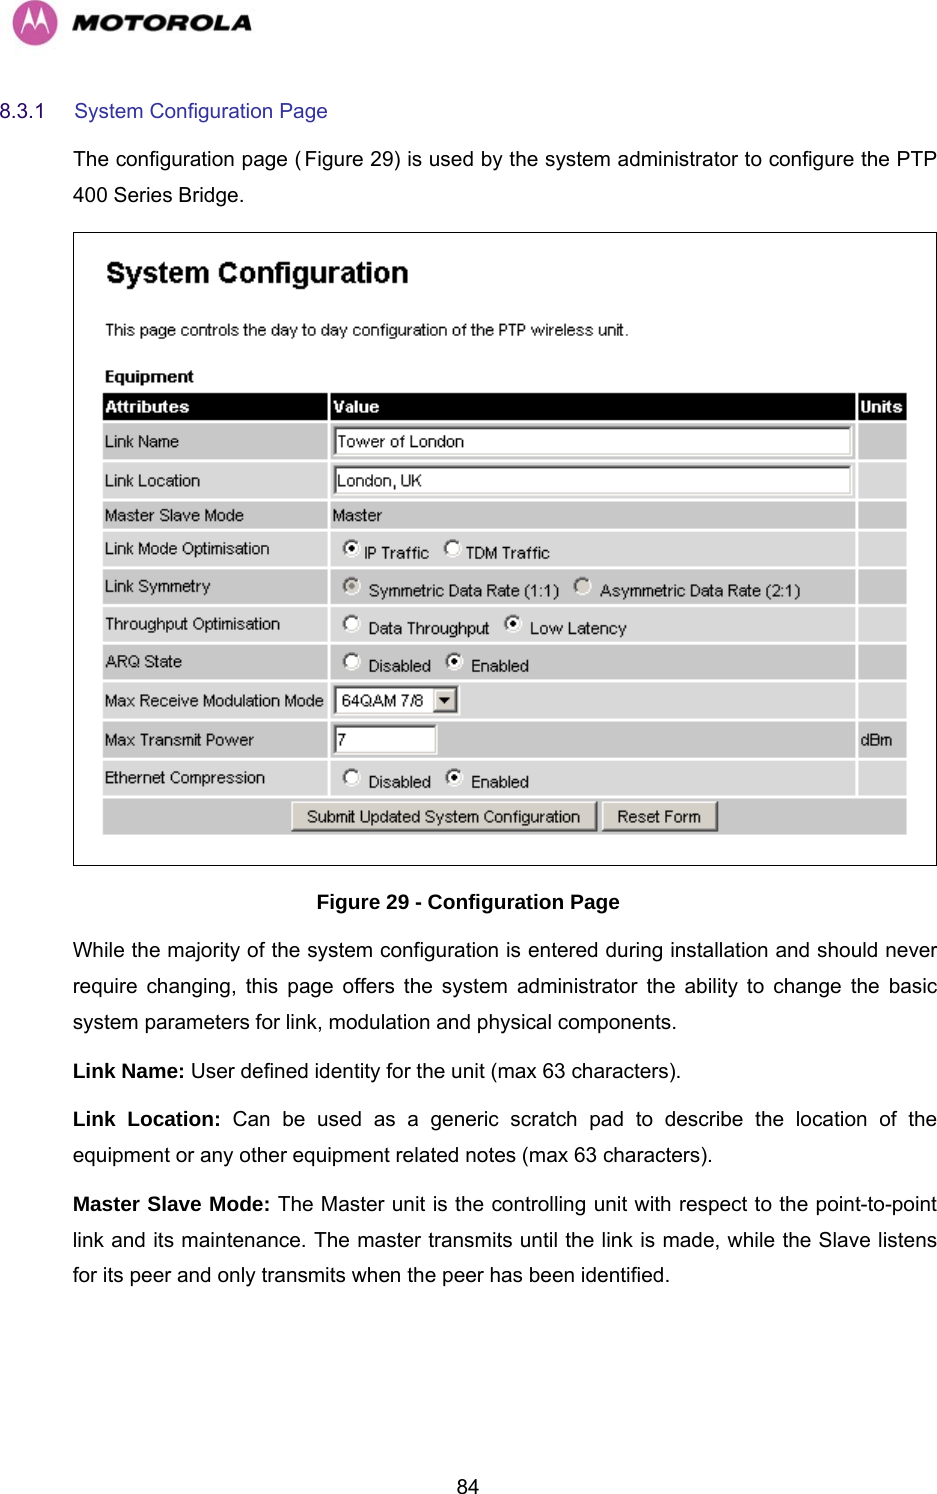   848.3.1  System Configuration Page  The configuration page (HFigure 29) is used by the system administrator to configure the PTP 400 Series Bridge.  Figure 29 - Configuration Page While the majority of the system configuration is entered during installation and should never require changing, this page offers the system administrator the ability to change the basic system parameters for link, modulation and physical components.  Link Name: User defined identity for the unit (max 63 characters).  Link Location: Can be used as a generic scratch pad to describe the location of the equipment or any other equipment related notes (max 63 characters).  Master Slave Mode: The Master unit is the controlling unit with respect to the point-to-point link and its maintenance. The master transmits until the link is made, while the Slave listens for its peer and only transmits when the peer has been identified. 